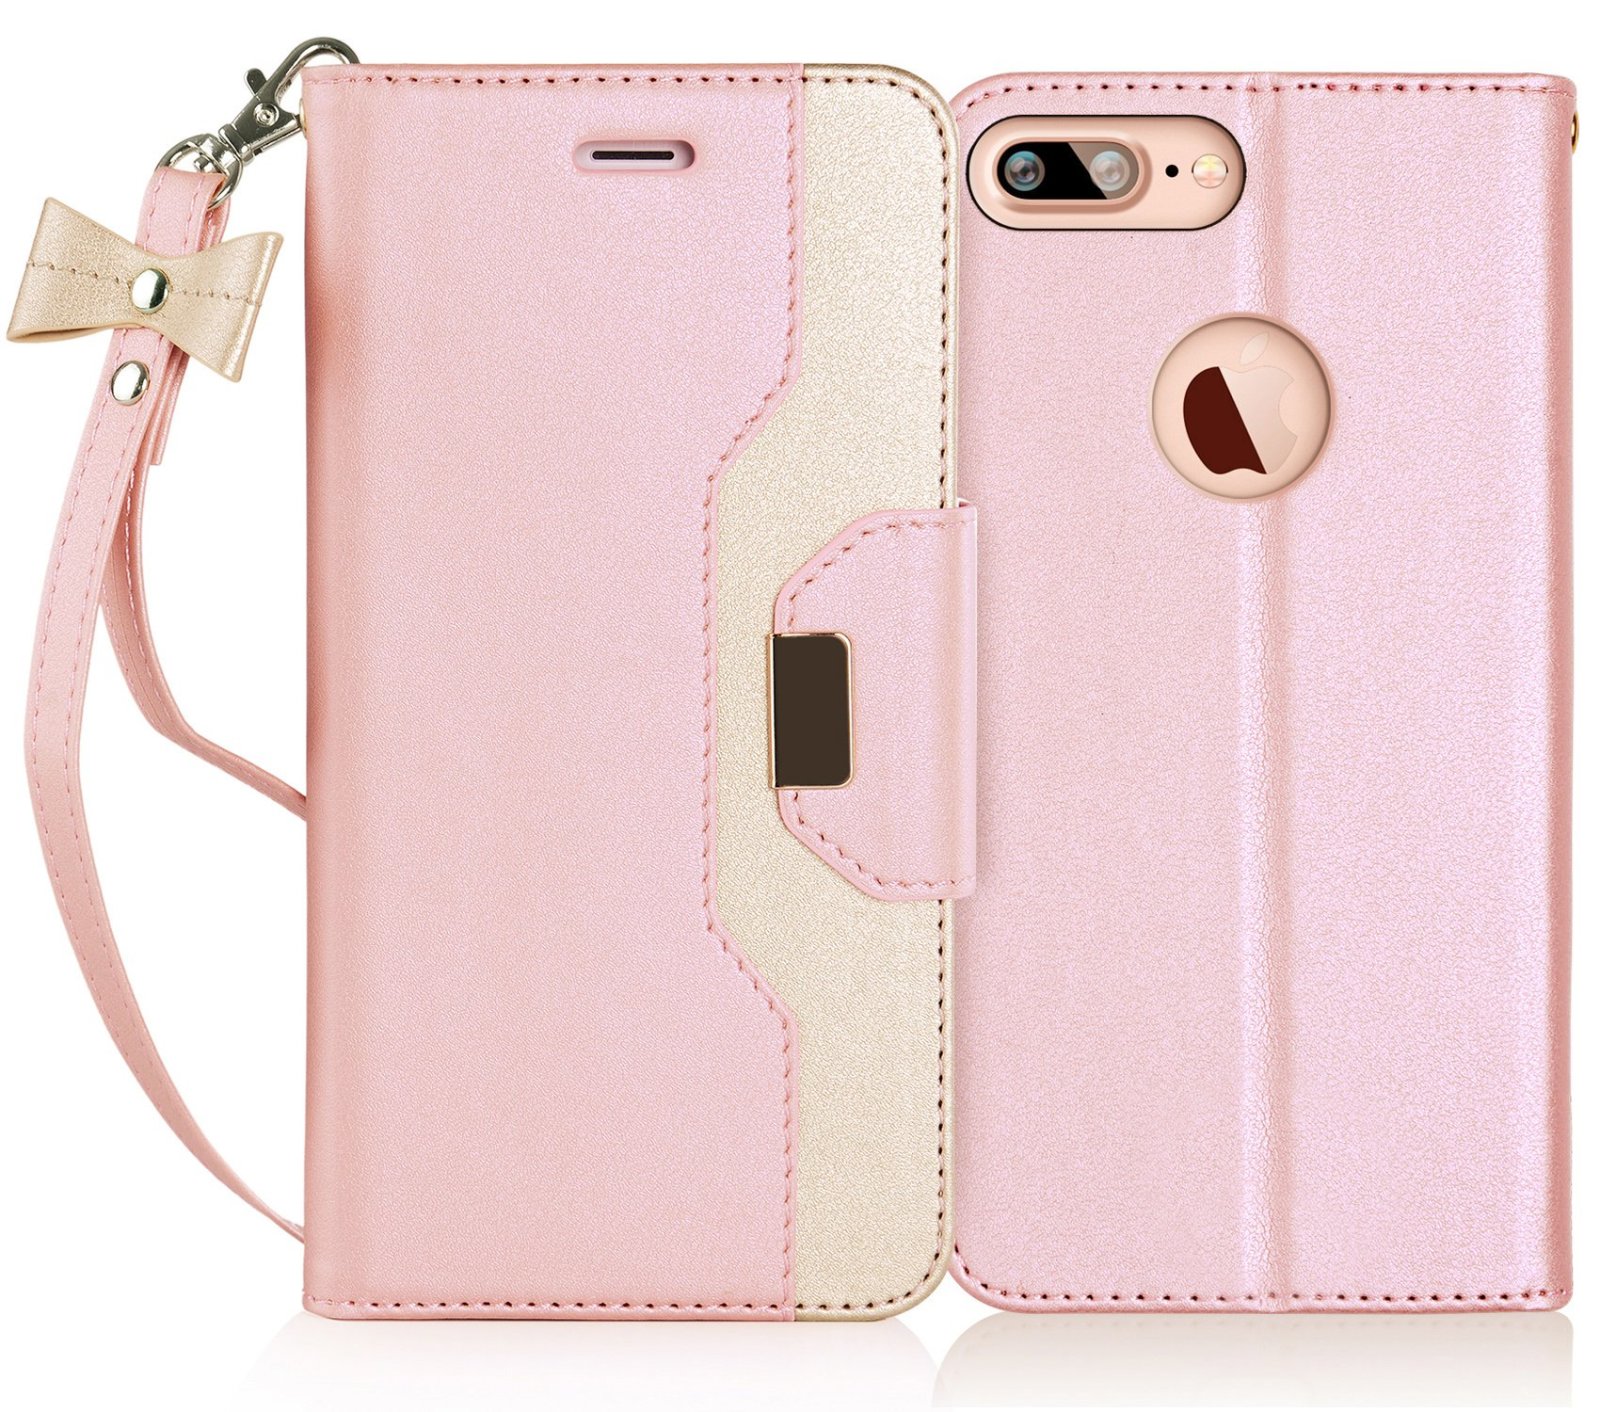 iPhone 7 Plus Wallet Case,FYY RFID Blocking Makeup Mirror Leather Bow-knot Strap